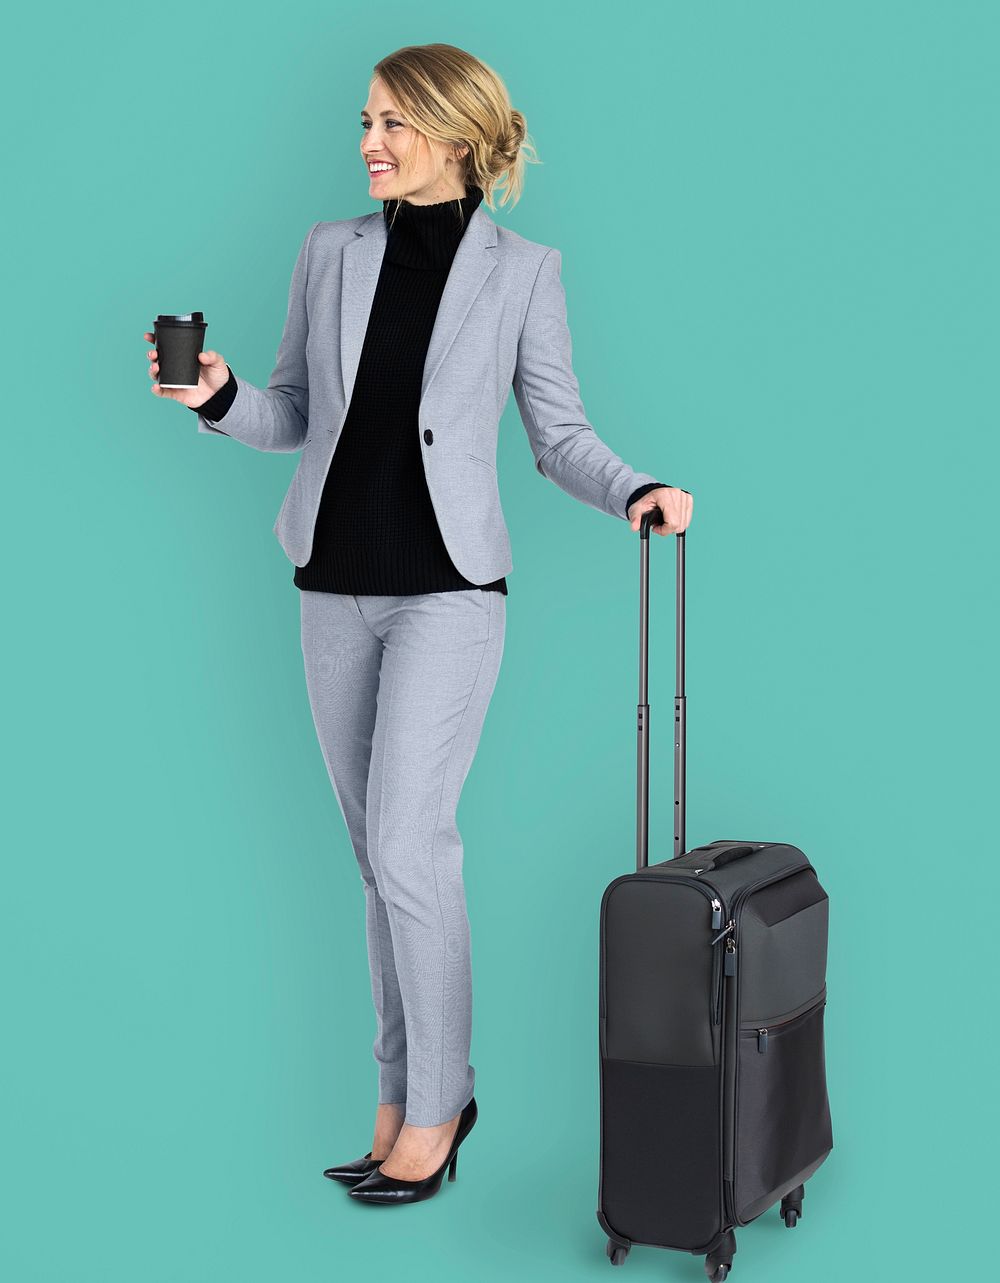 Caucasian Business Woman Travel Luggage Concept